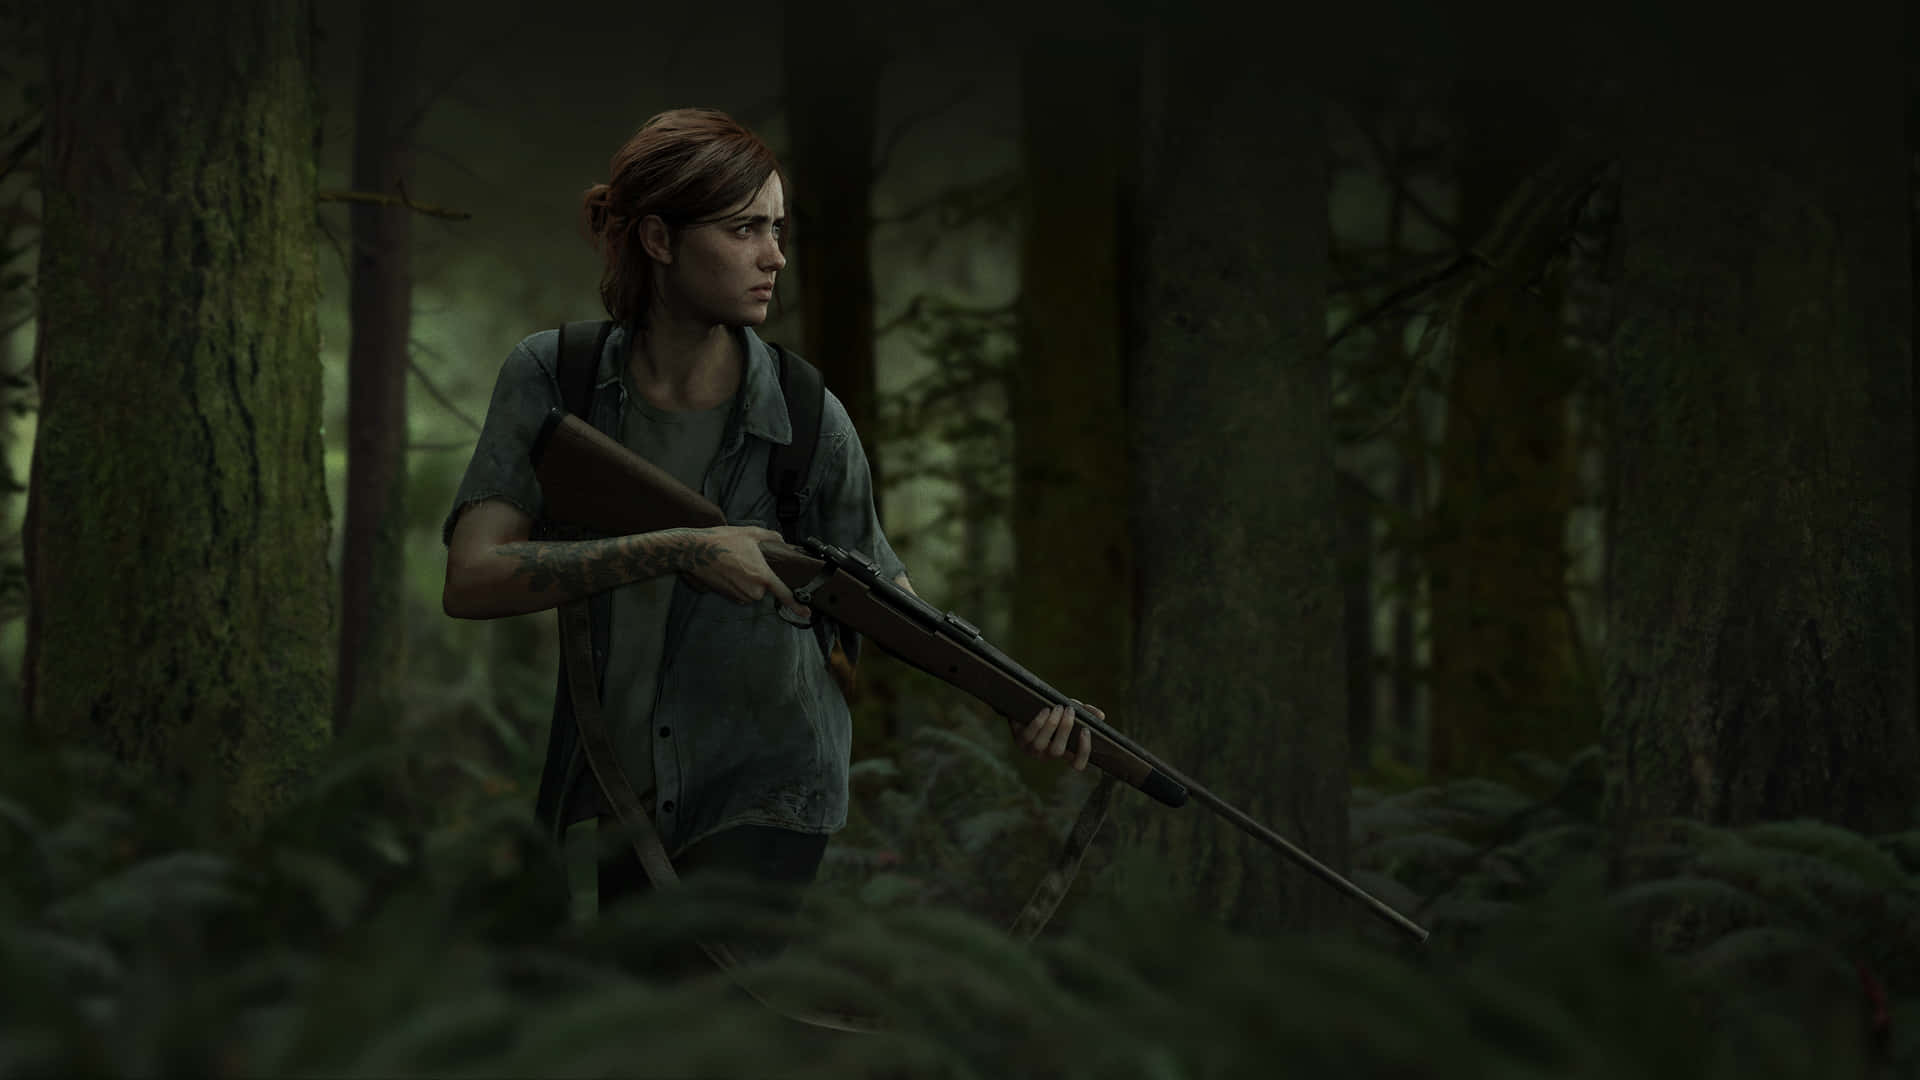 Last Of Us 2 iPhone Wallpapers  The last of us, The lest of us, Background  images